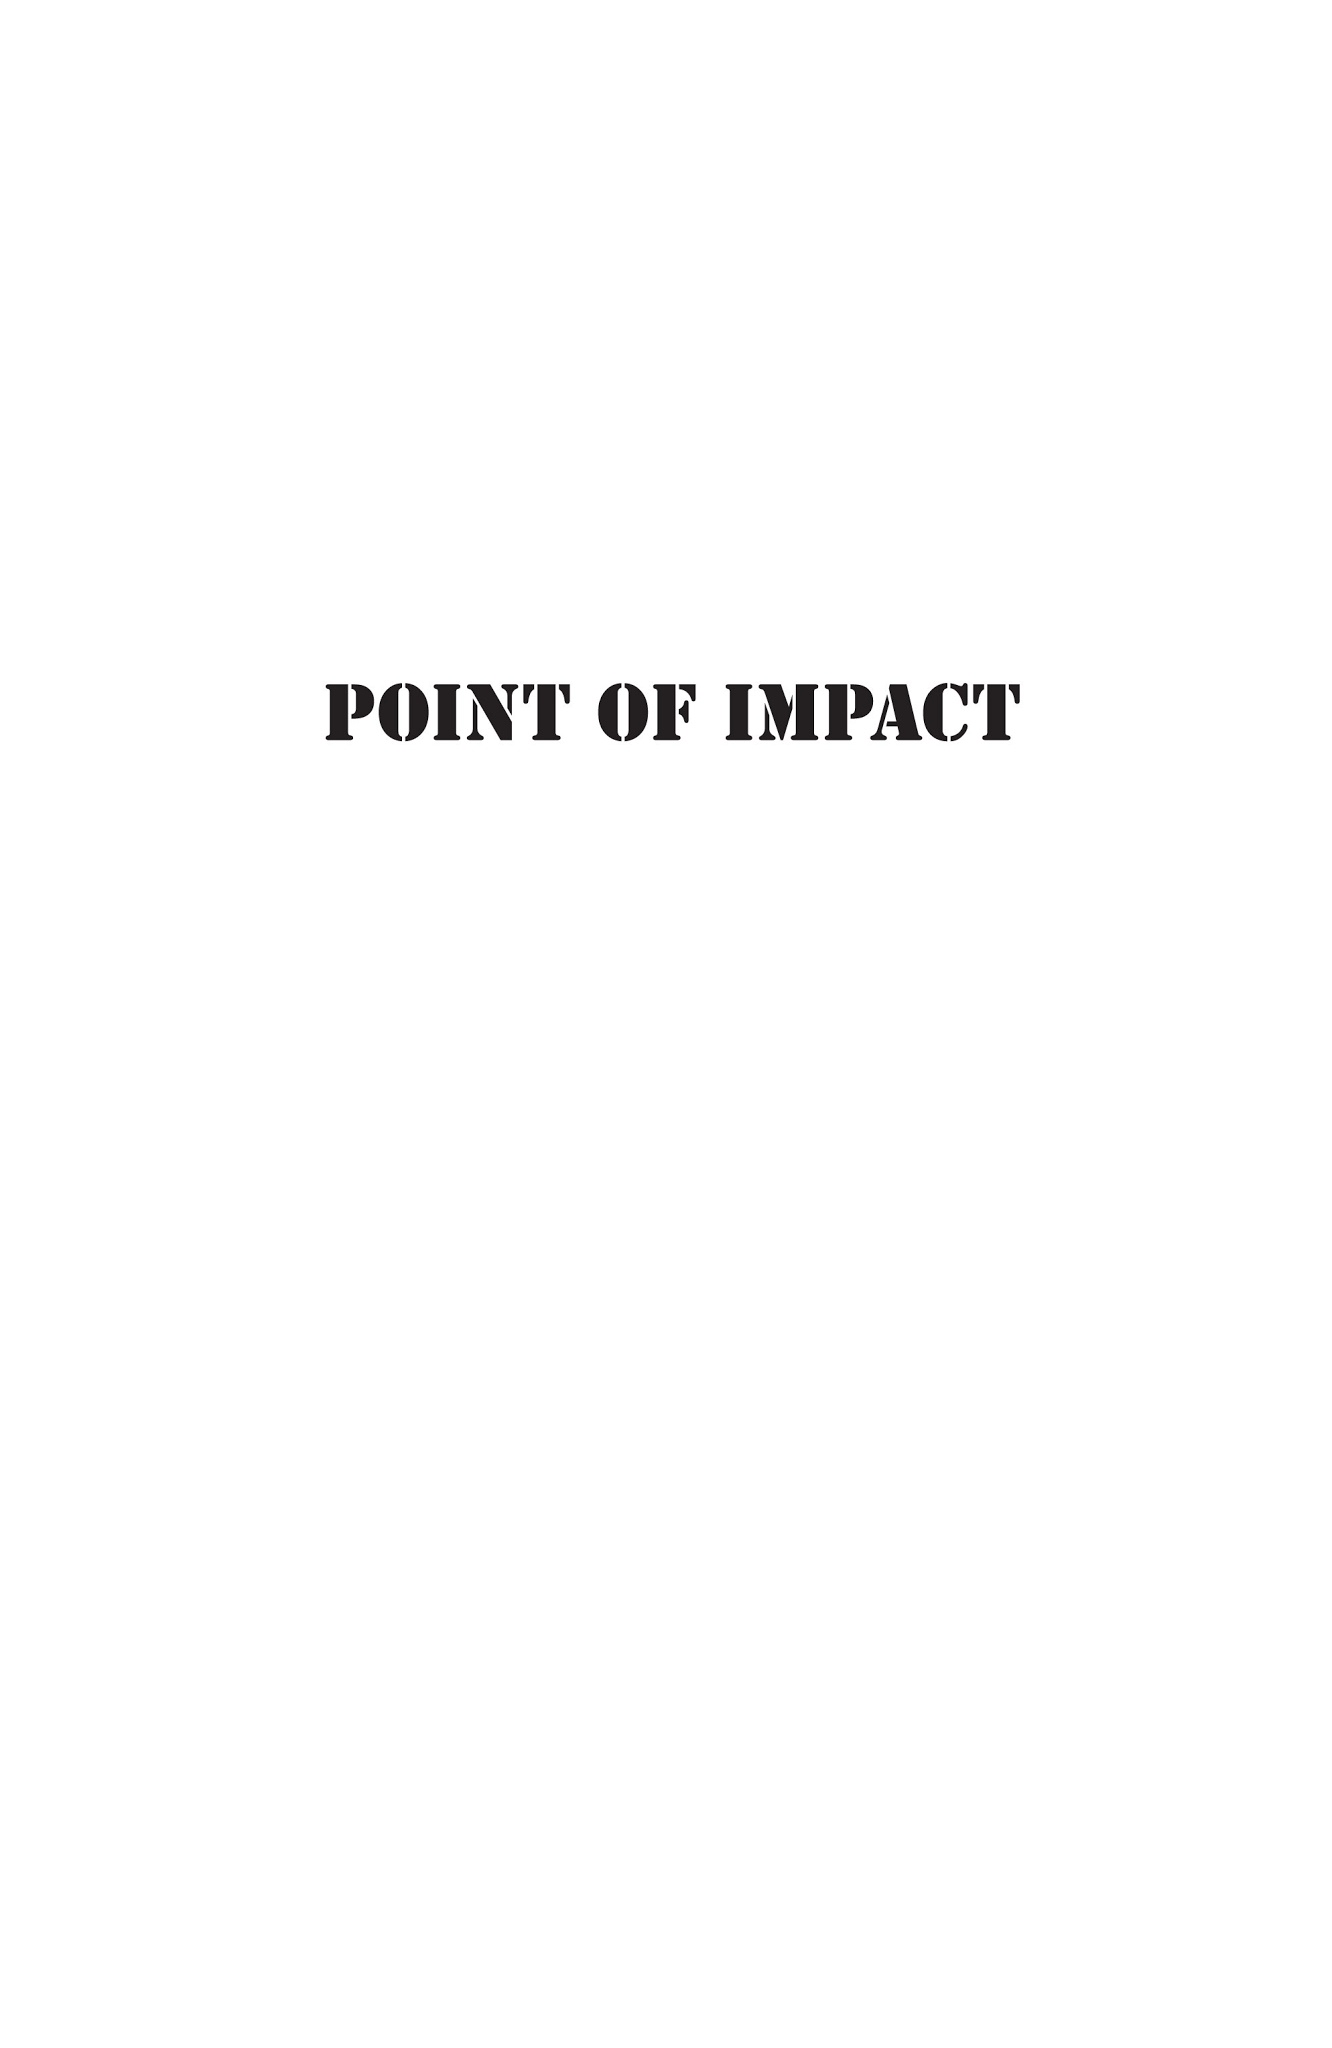 Read online Point Of Impact comic -  Issue # TPB - 2